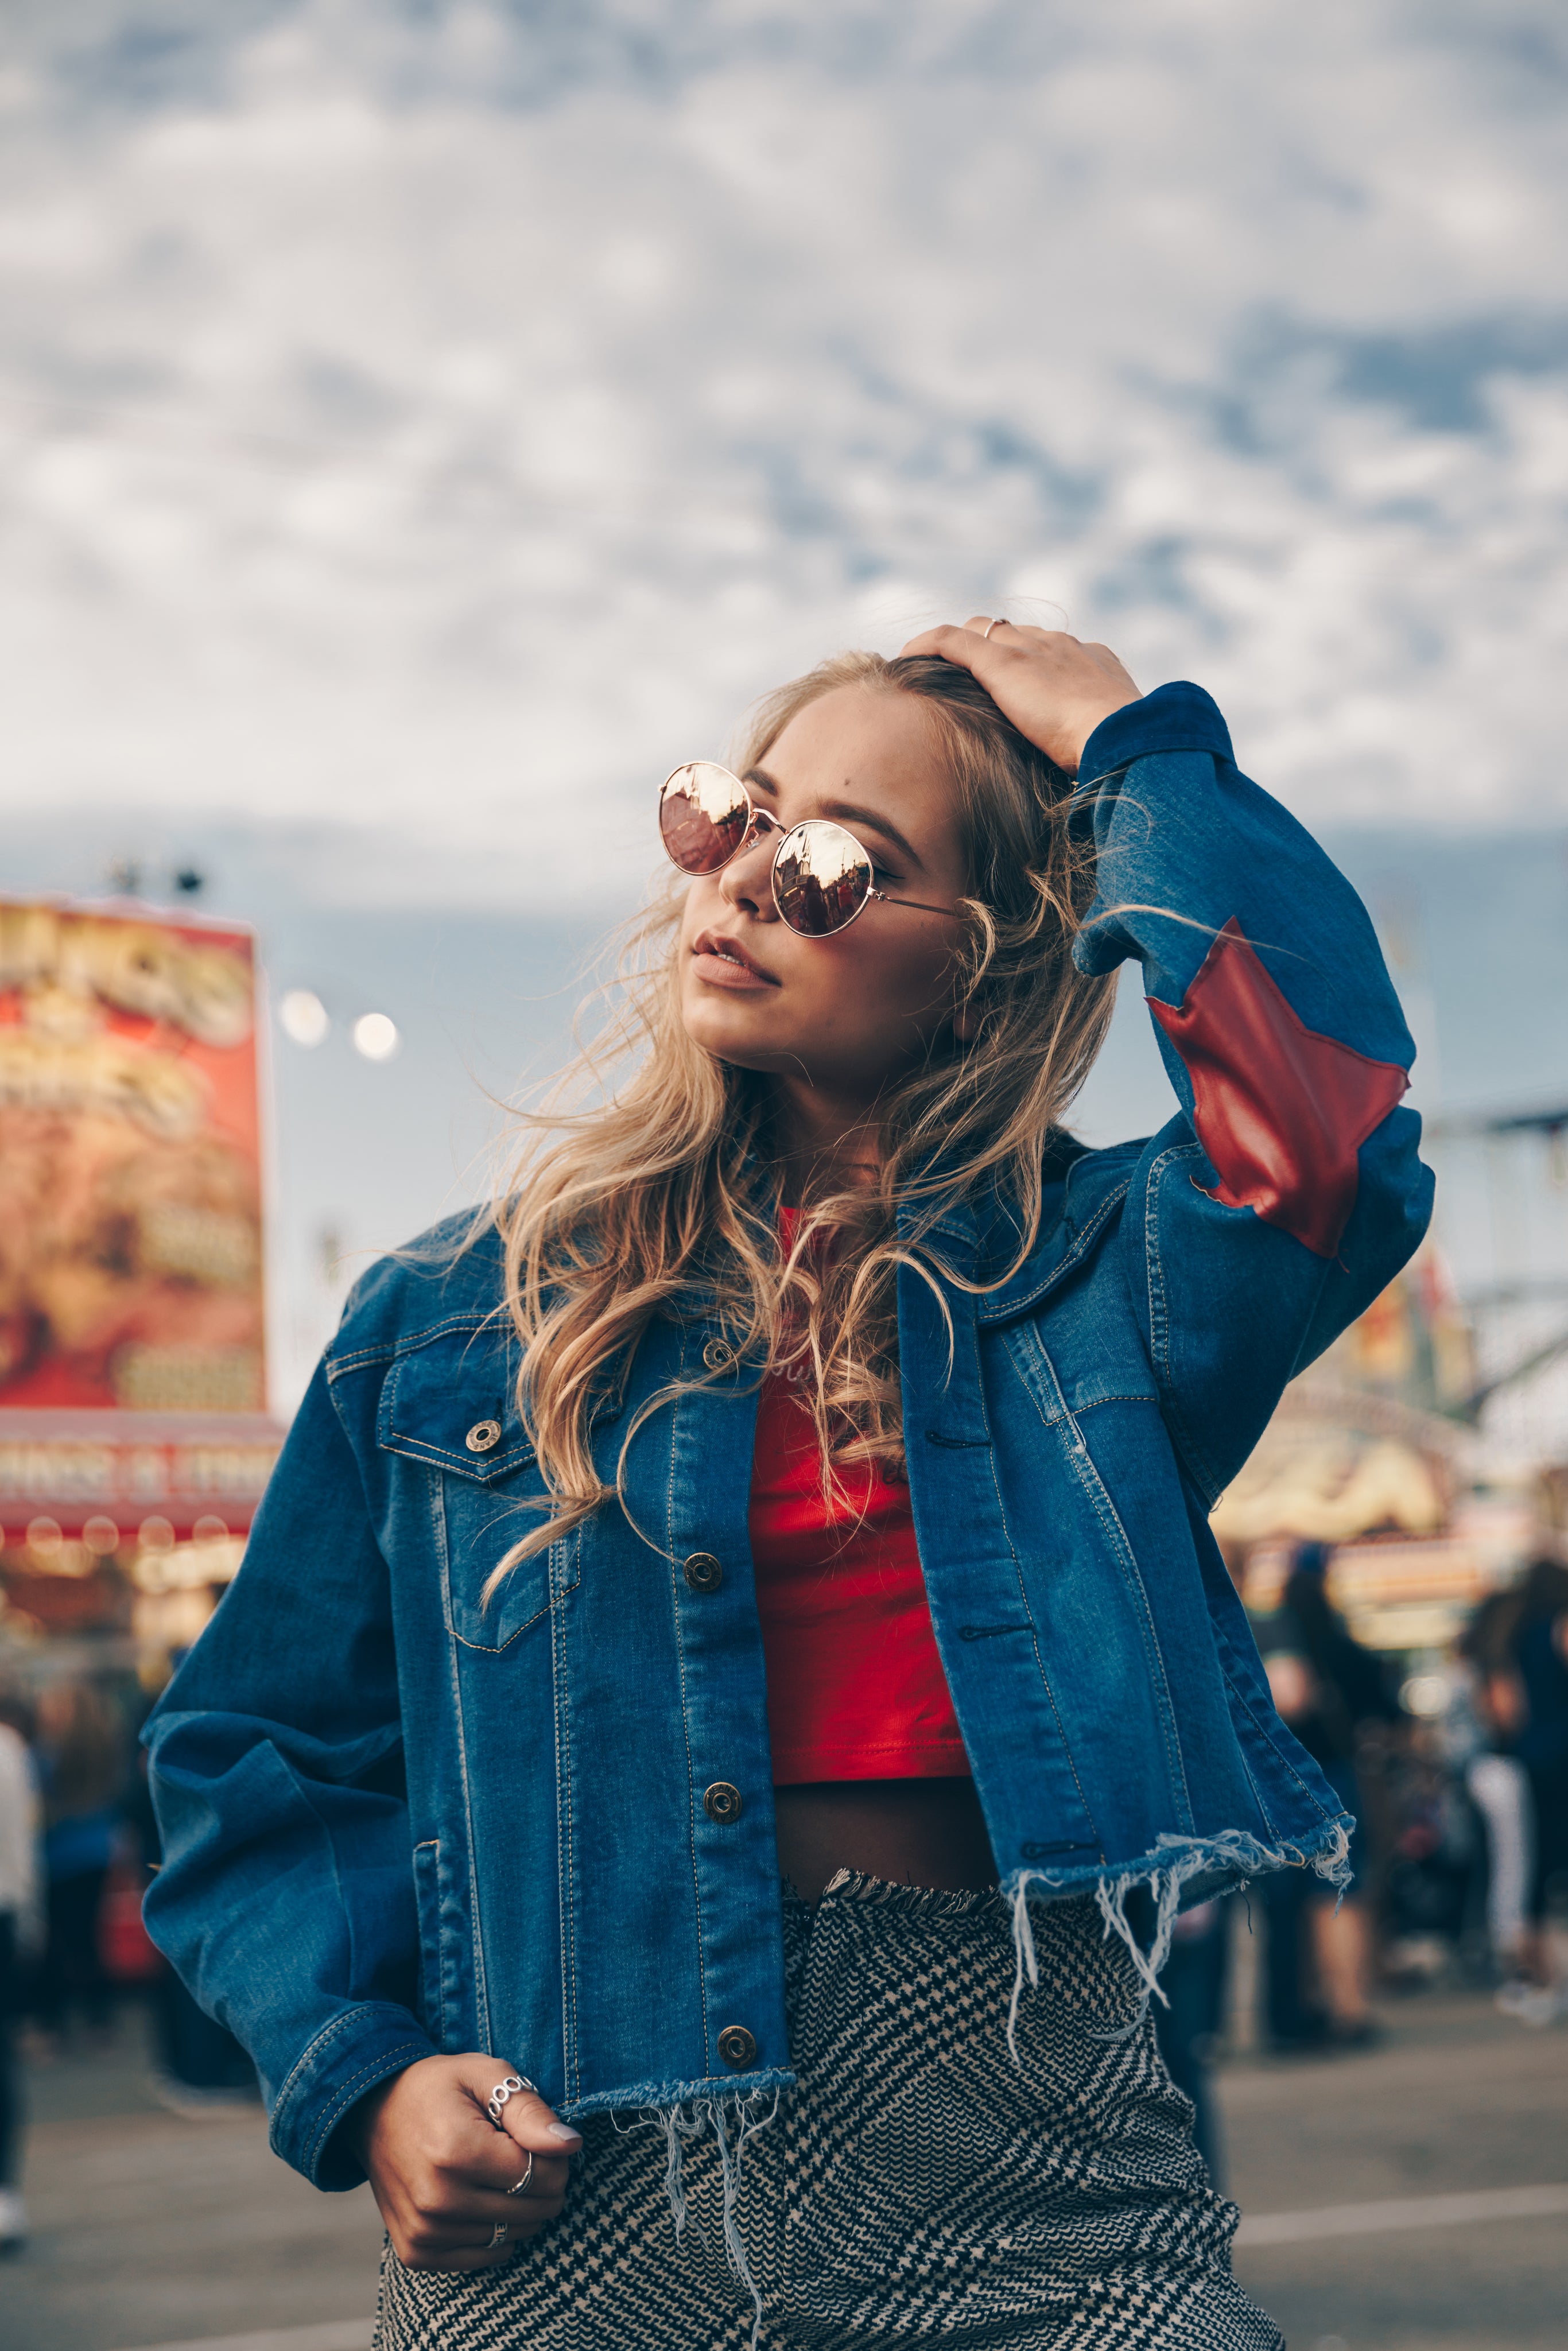 White woman wearing black jeans, red shirt, and frayed jean jacket with red star on elbow. She has long blonde hair and wearing mirrored sunglasses.